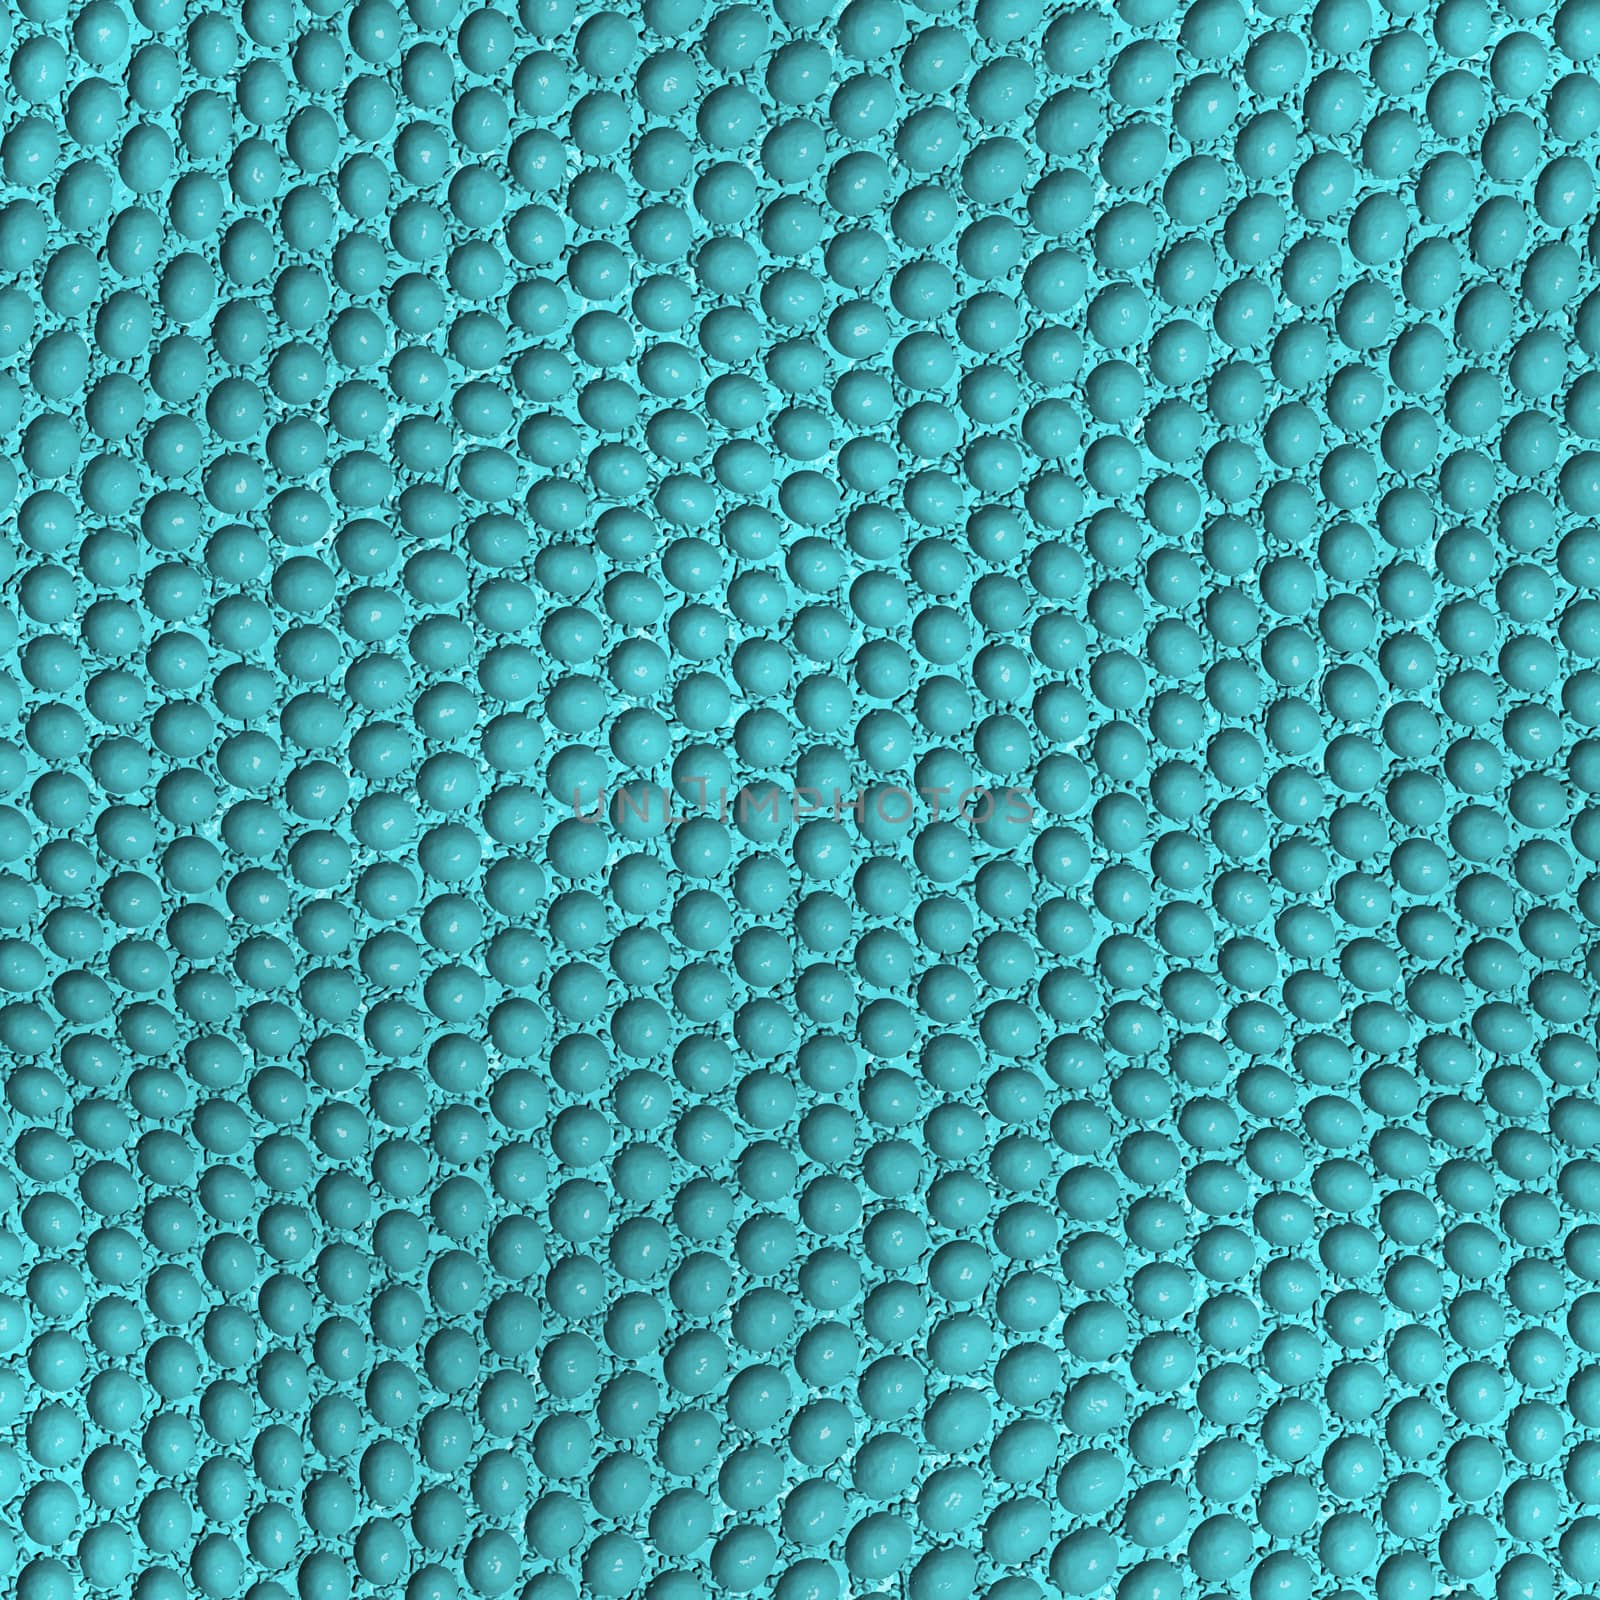 blue leather texture background